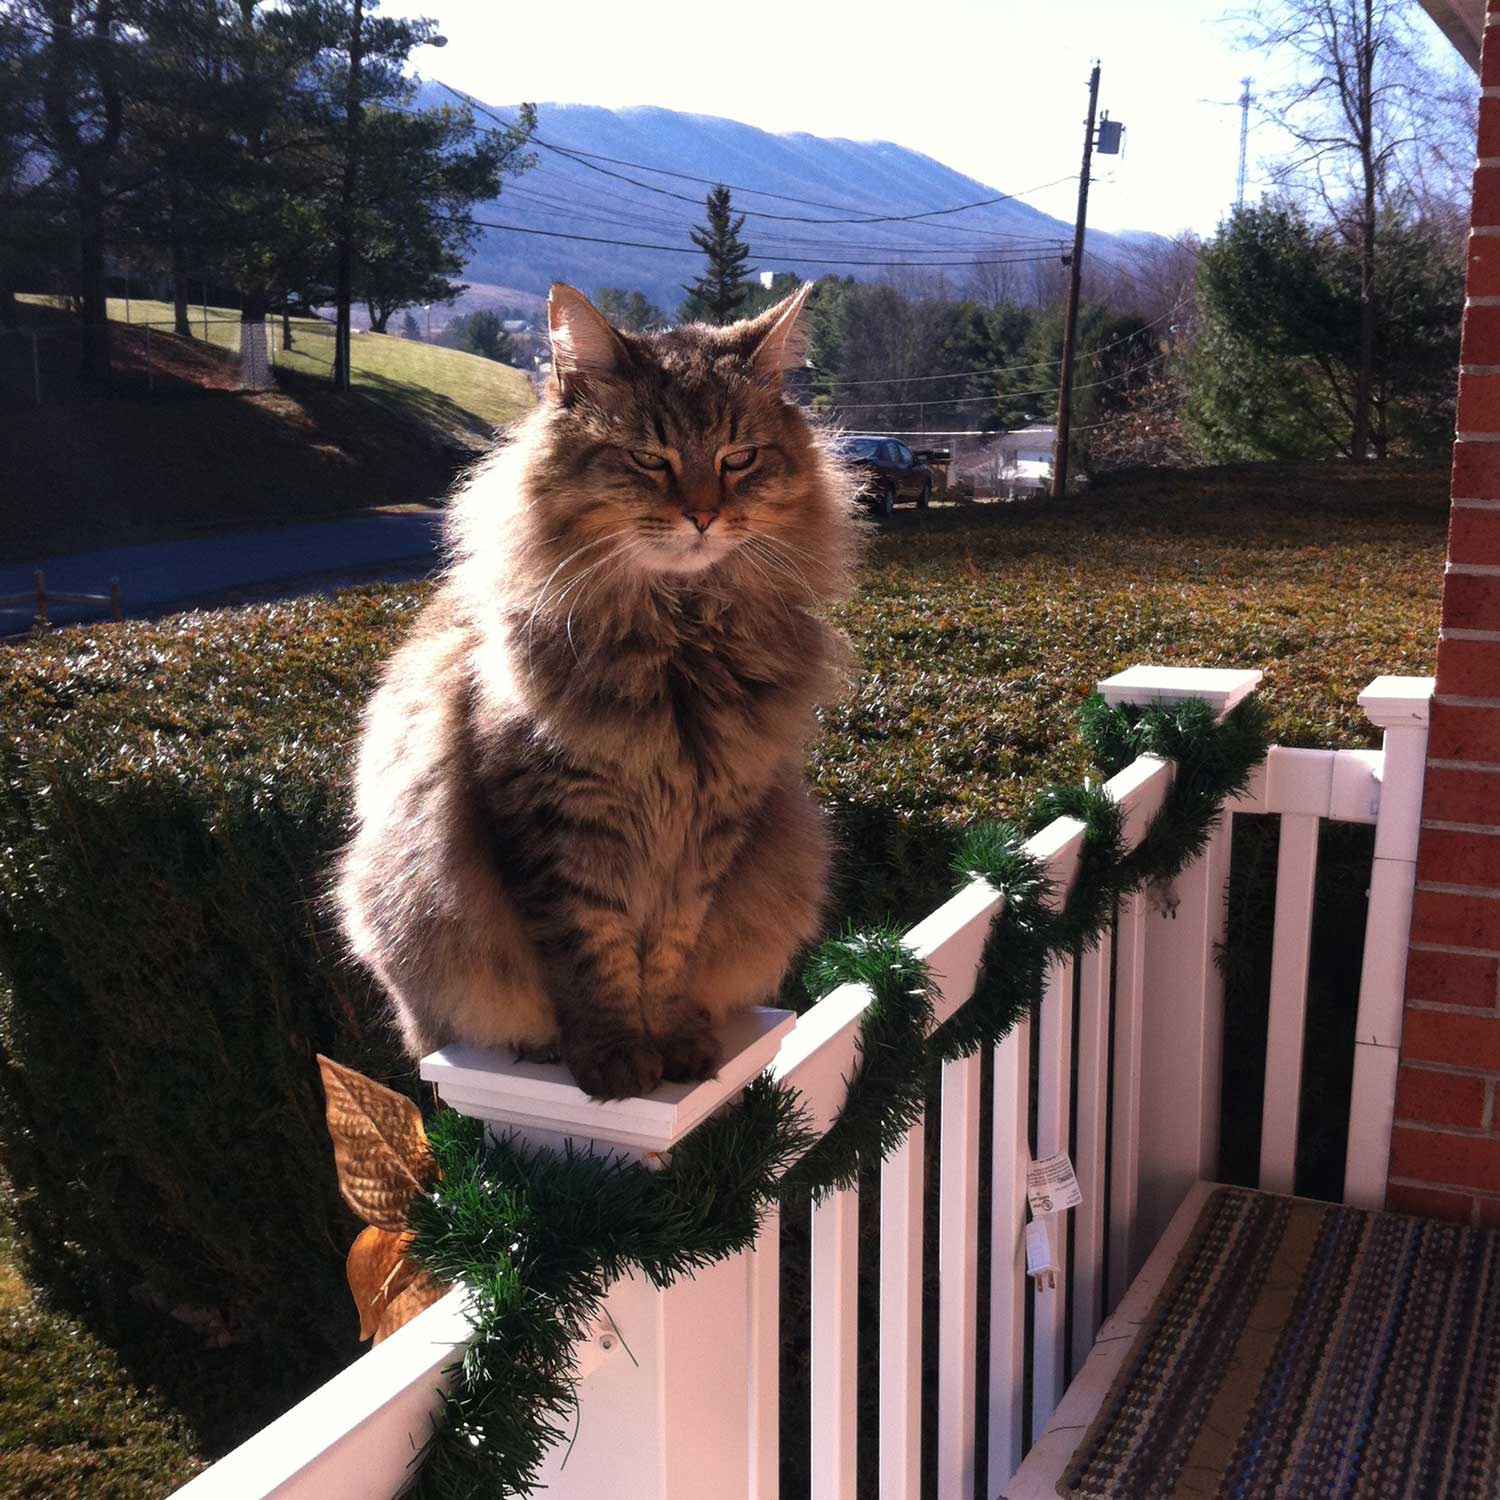 A reader sent a picture of her gorgeous long haired green eyed cat sophie sitting on the front porch railing with beautiful long white whiskers Sophies the welcoming committee apparently